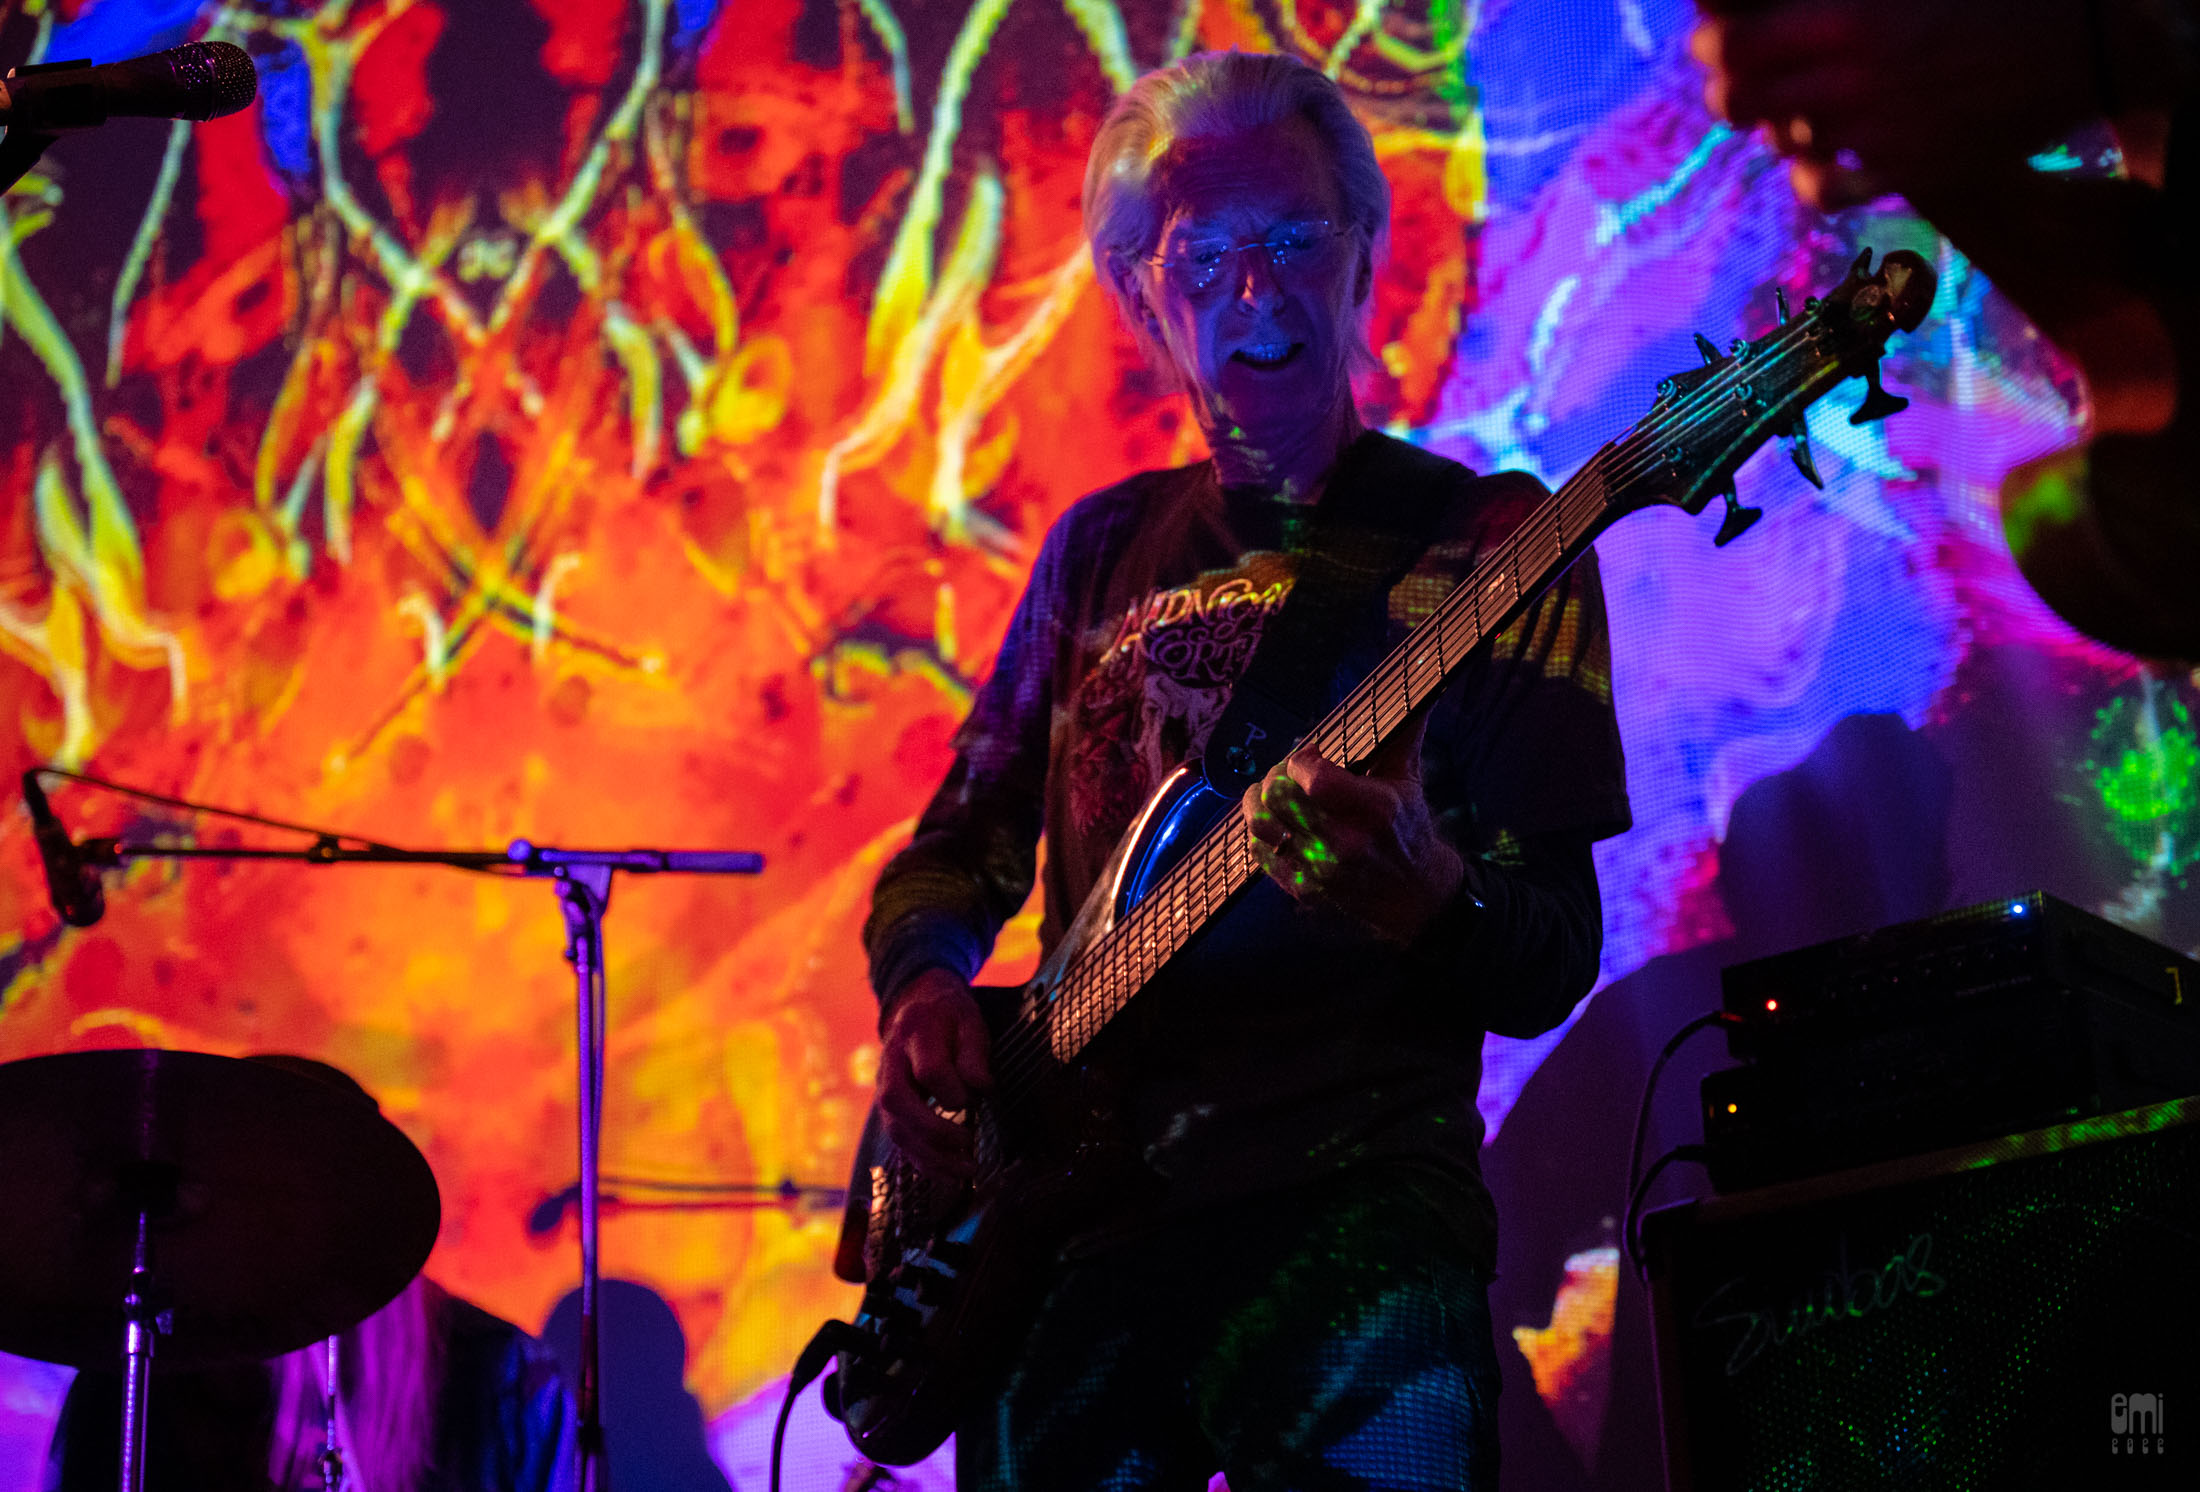 20220407 Midnight North with a special guest Phil Lesh, Mad Alchemy Liquid Lightshow at The Chapel, SF. photo by emi